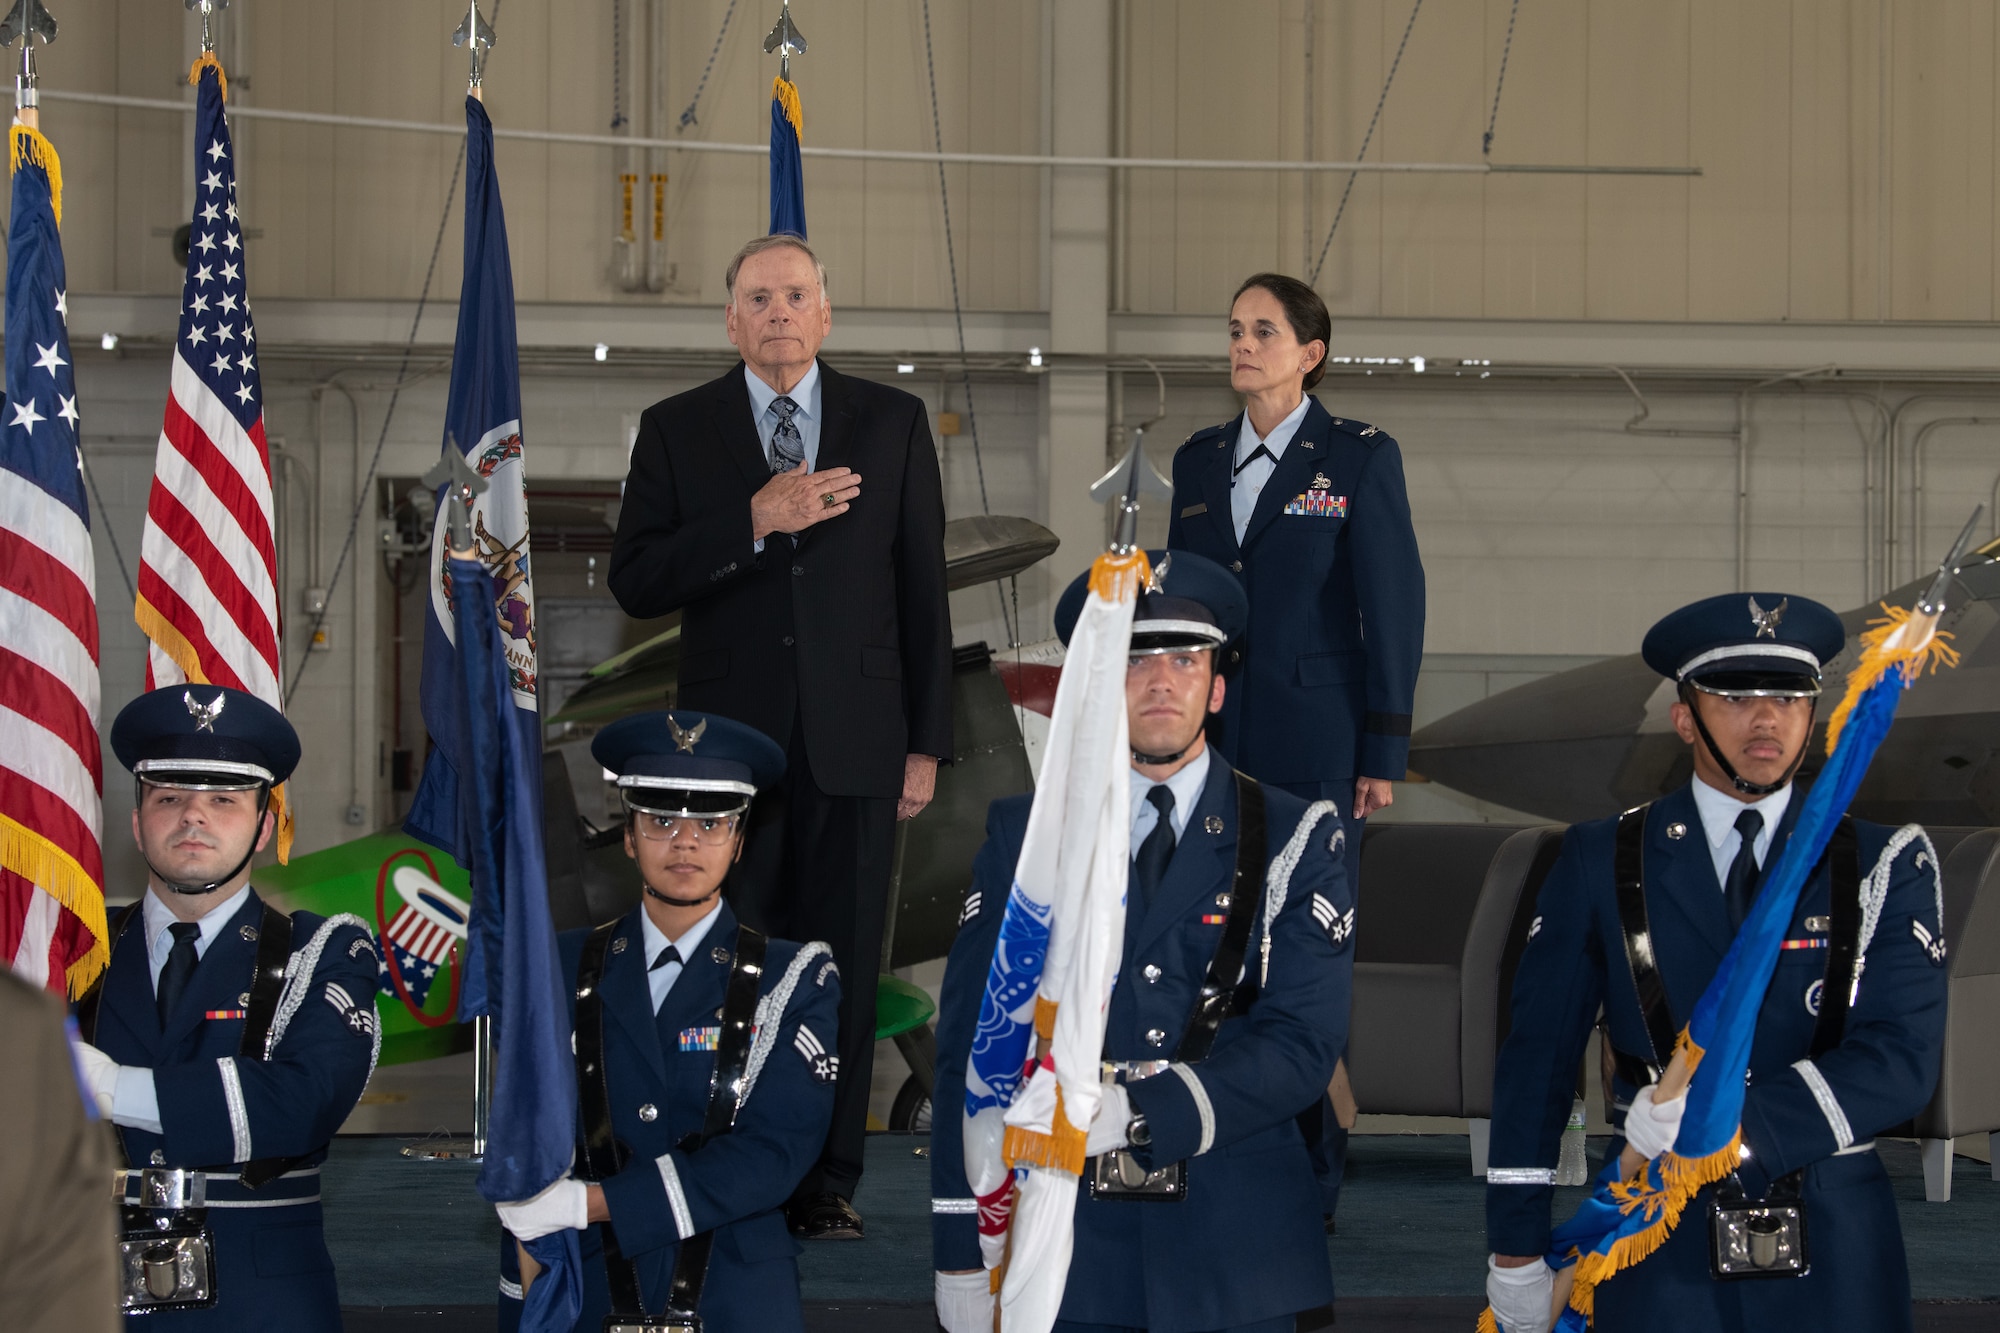 Gen. John P. Jumper and Col. Catherine M. Jumper stand on stage while the Honor Guard presents the colors for the National Anthem.